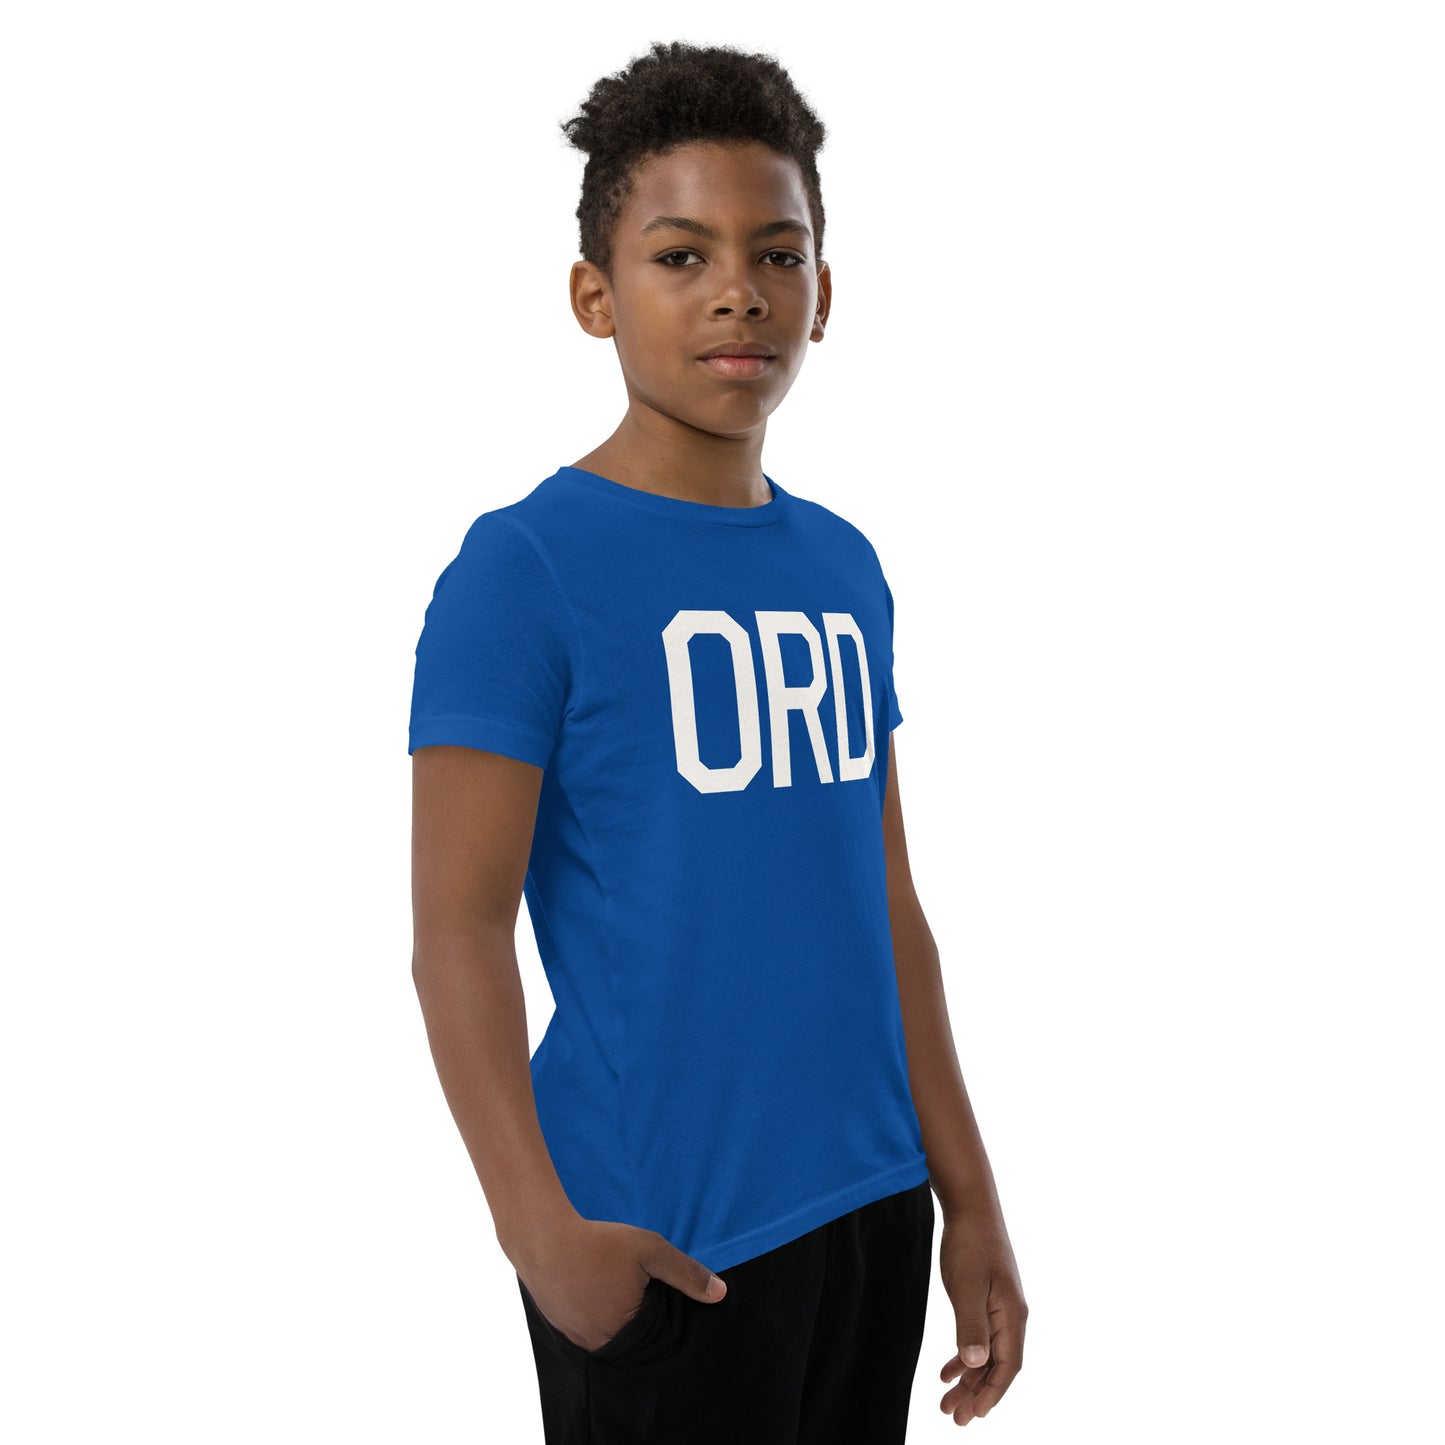 Kid's T-Shirt - White Graphic • ORD Chicago • YHM Designs - Image 12